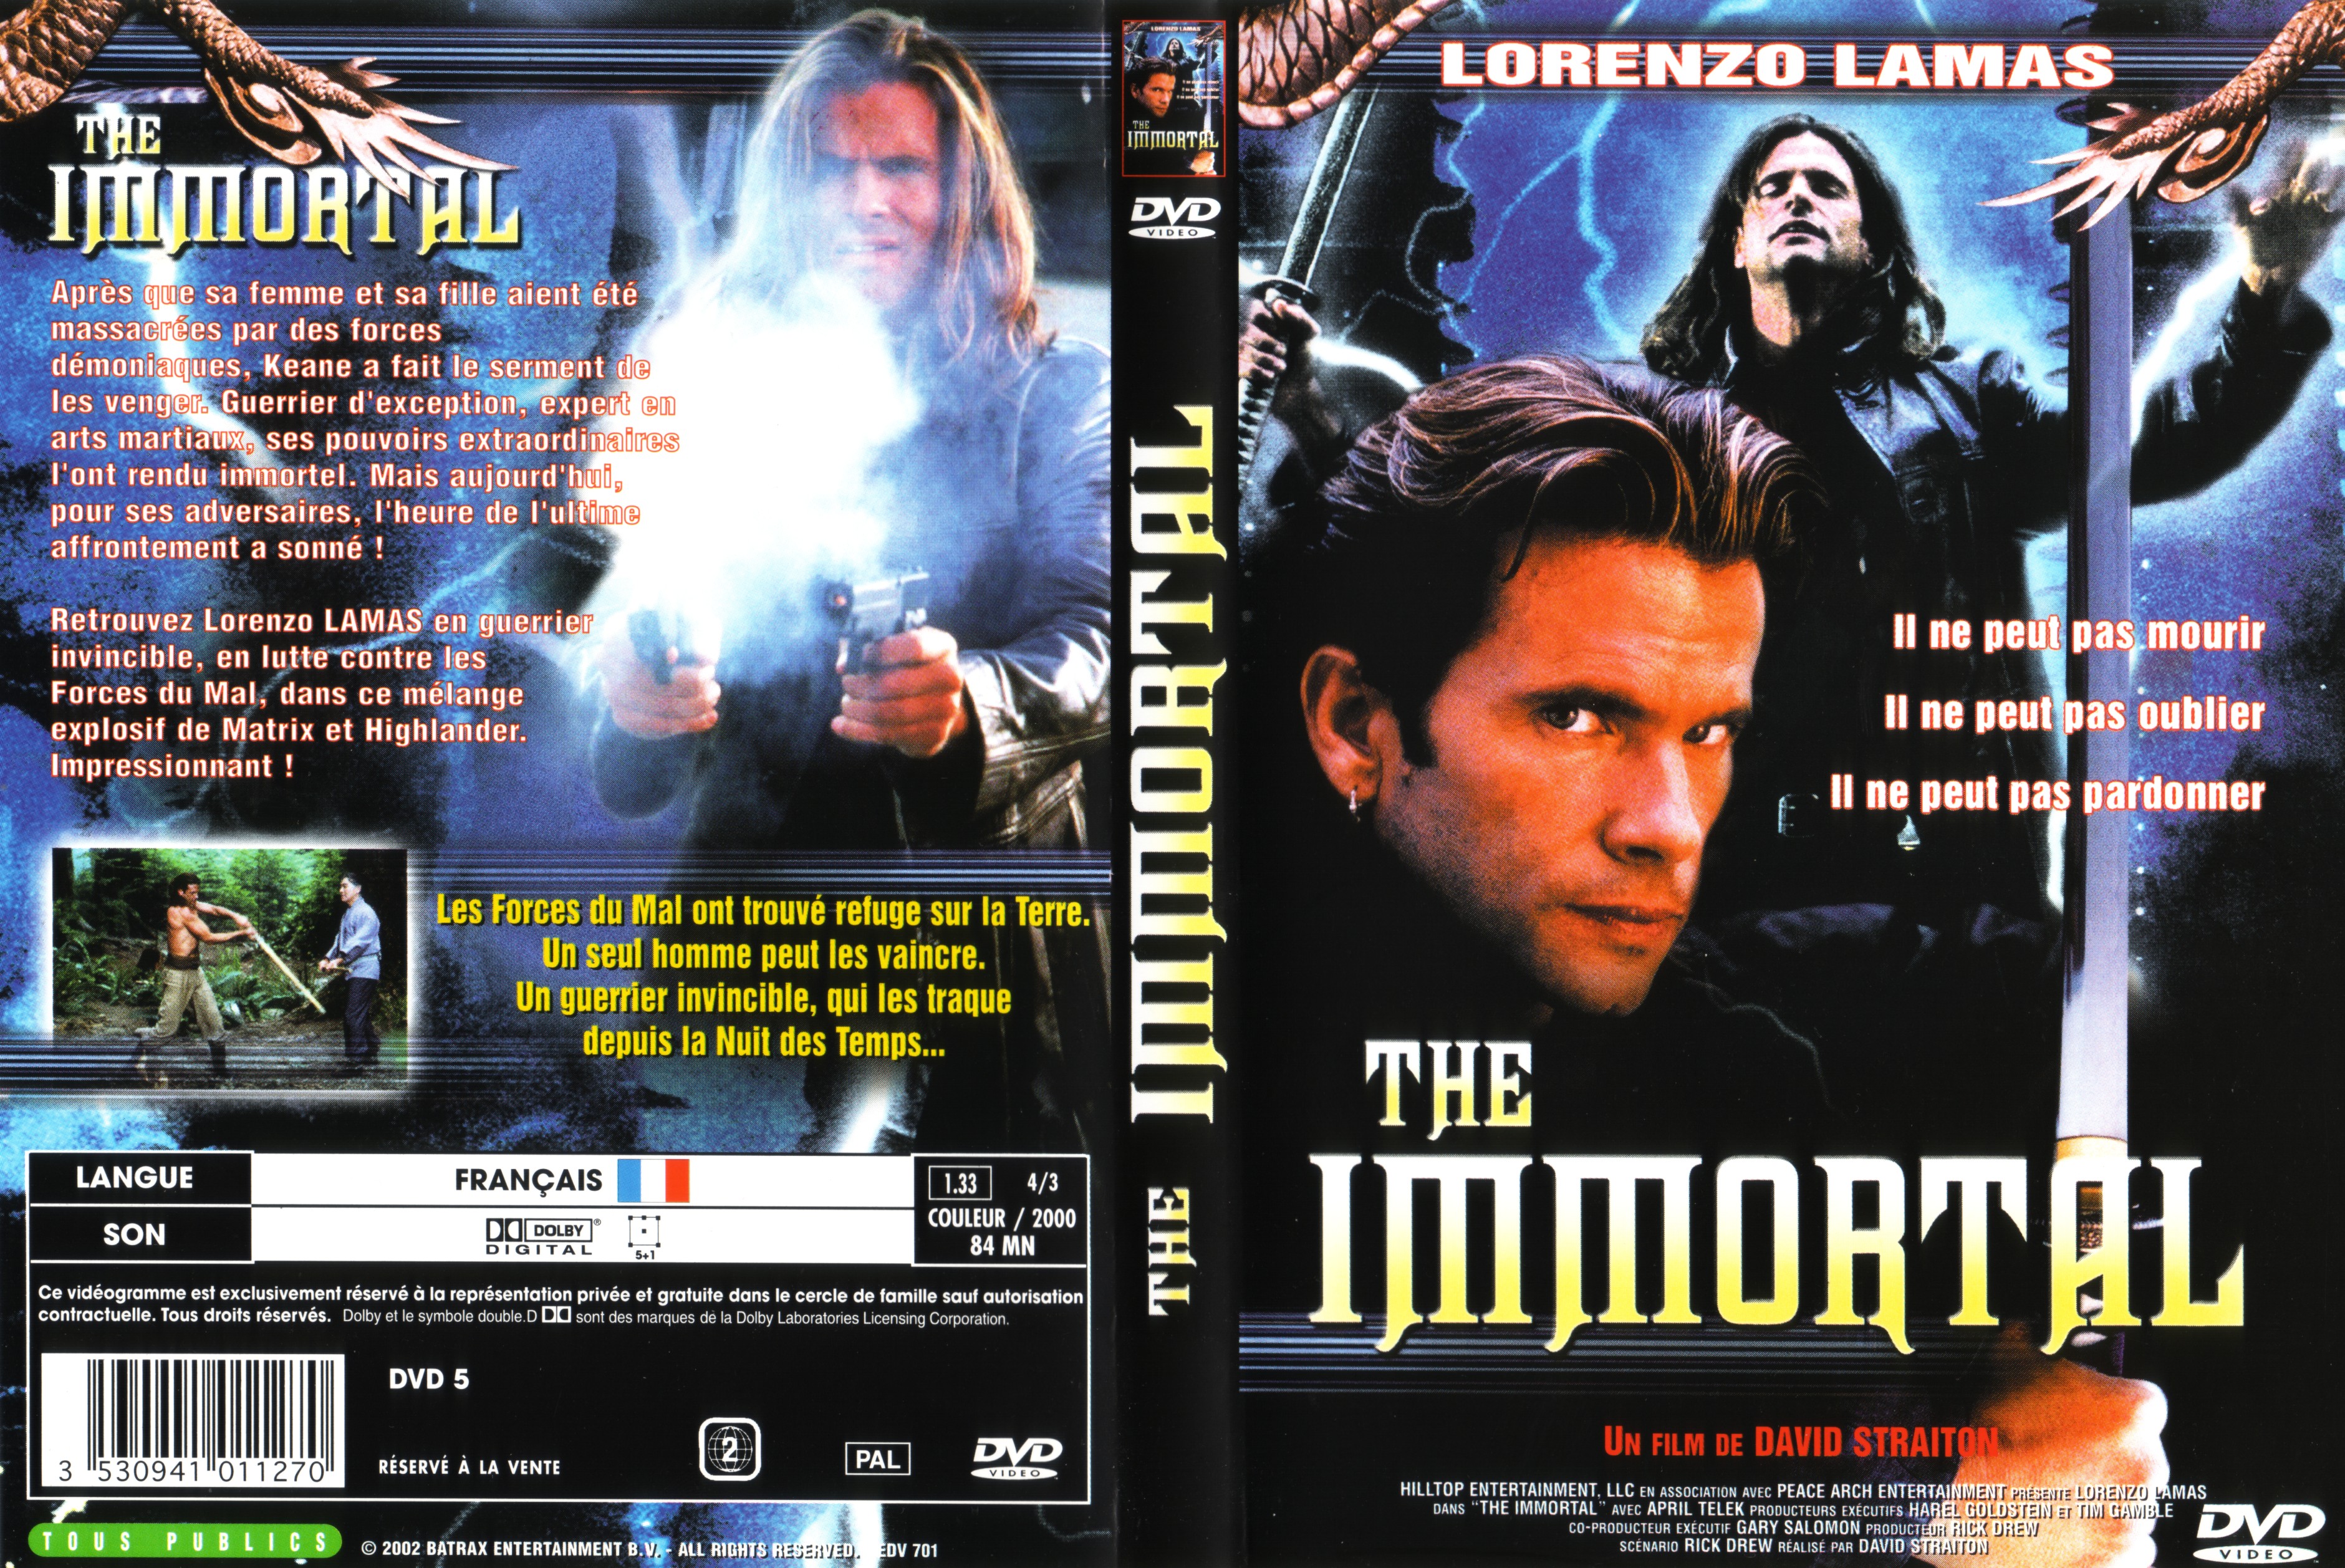 Jaquette DVD The immortal